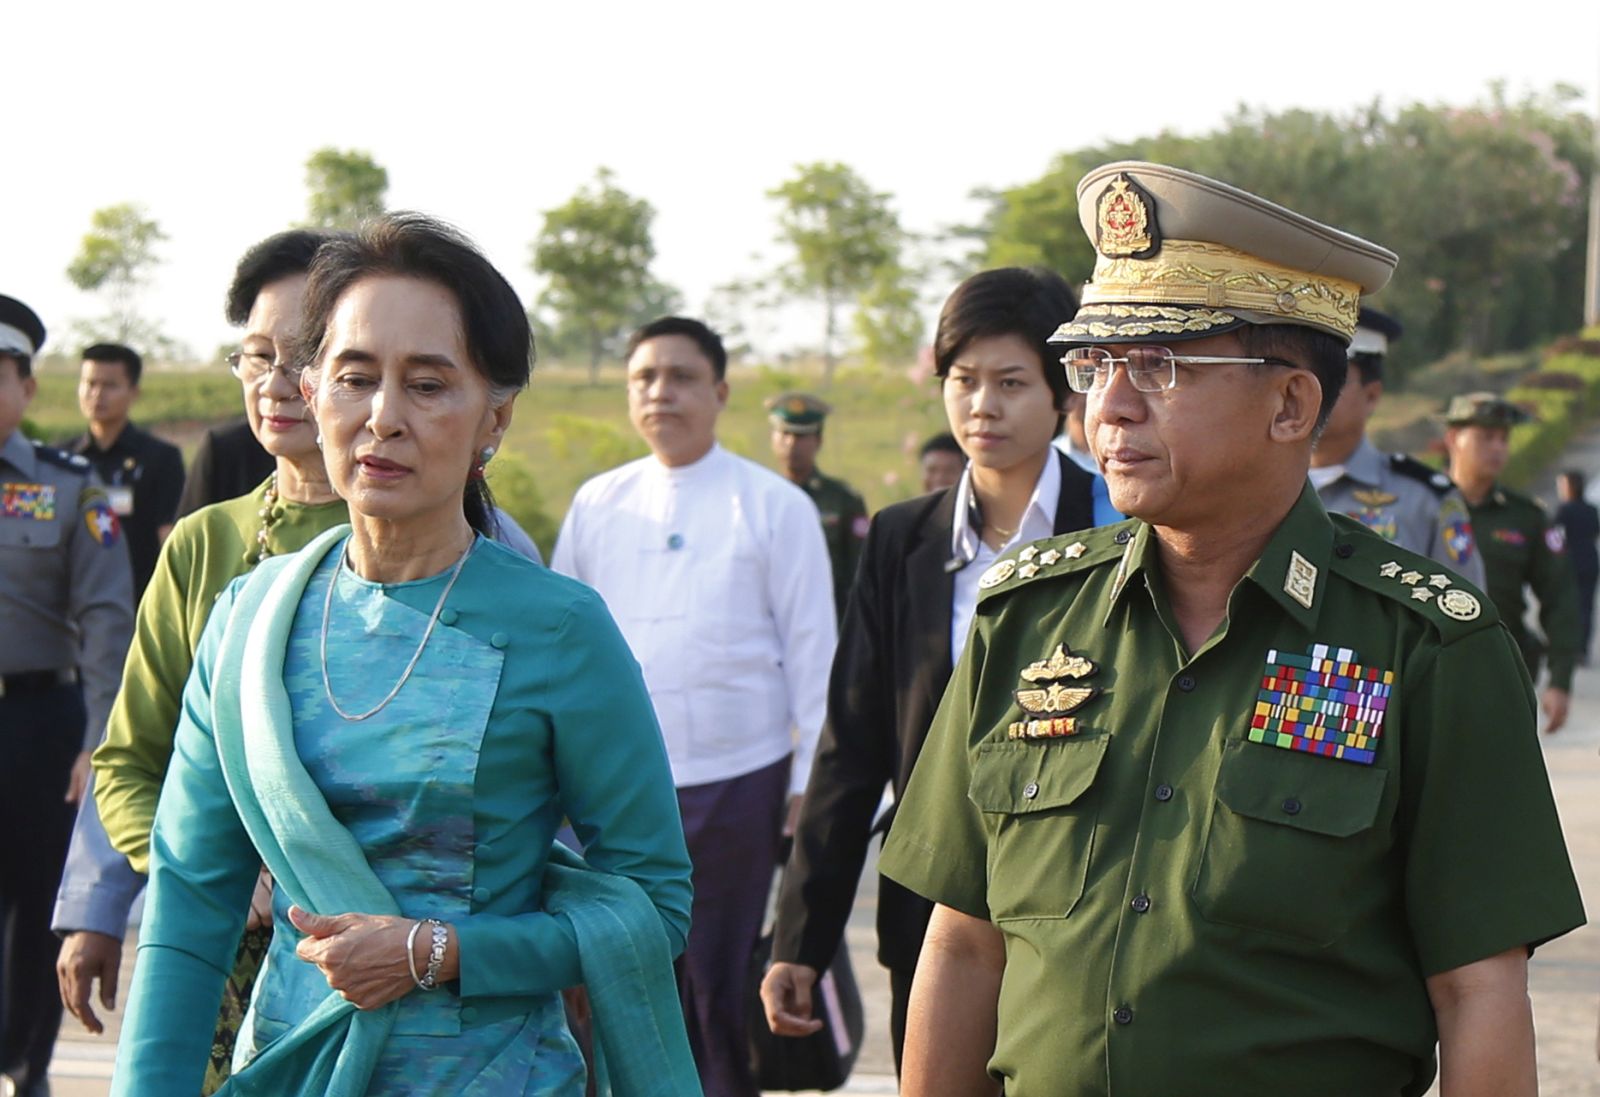 epa08979221 (FILE) - Senior General Min Aung Hlaing (R) and Myanmar Foreign Minister and State Counselor Aung San Suu Kyi (L) arrive to Naypyitaw International Airport in Naypyitaw, Myanmar, 06 May 2016 (reissued 01 February 2021). According to media reports, Myanmar's army has seized power after arresting leading politicians over allegations of fraud in the Novemeber democratic elections.  EPA/HEIN HTET  EPA-EFE/HEIN HTET *** Local Caption *** 56582681